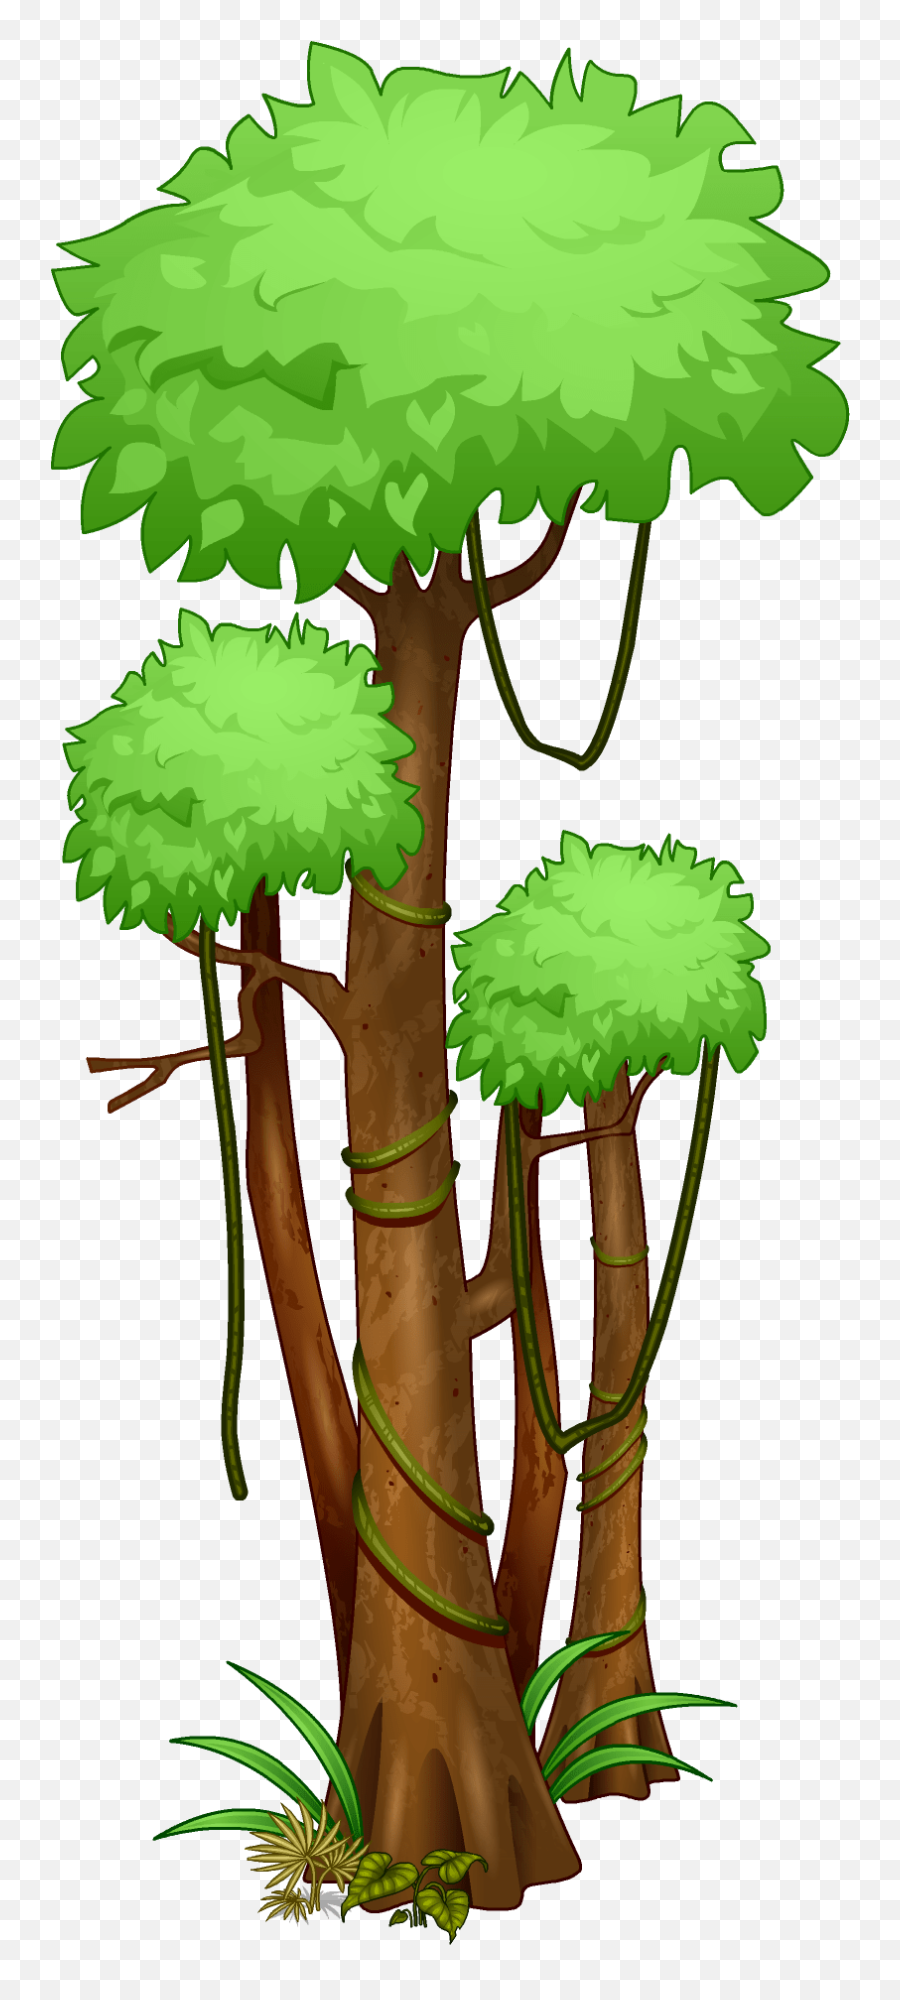 Woozworld - Rainforest Trees Clipart Emoji,How To Get No Emoticon For Your Status Woozworld